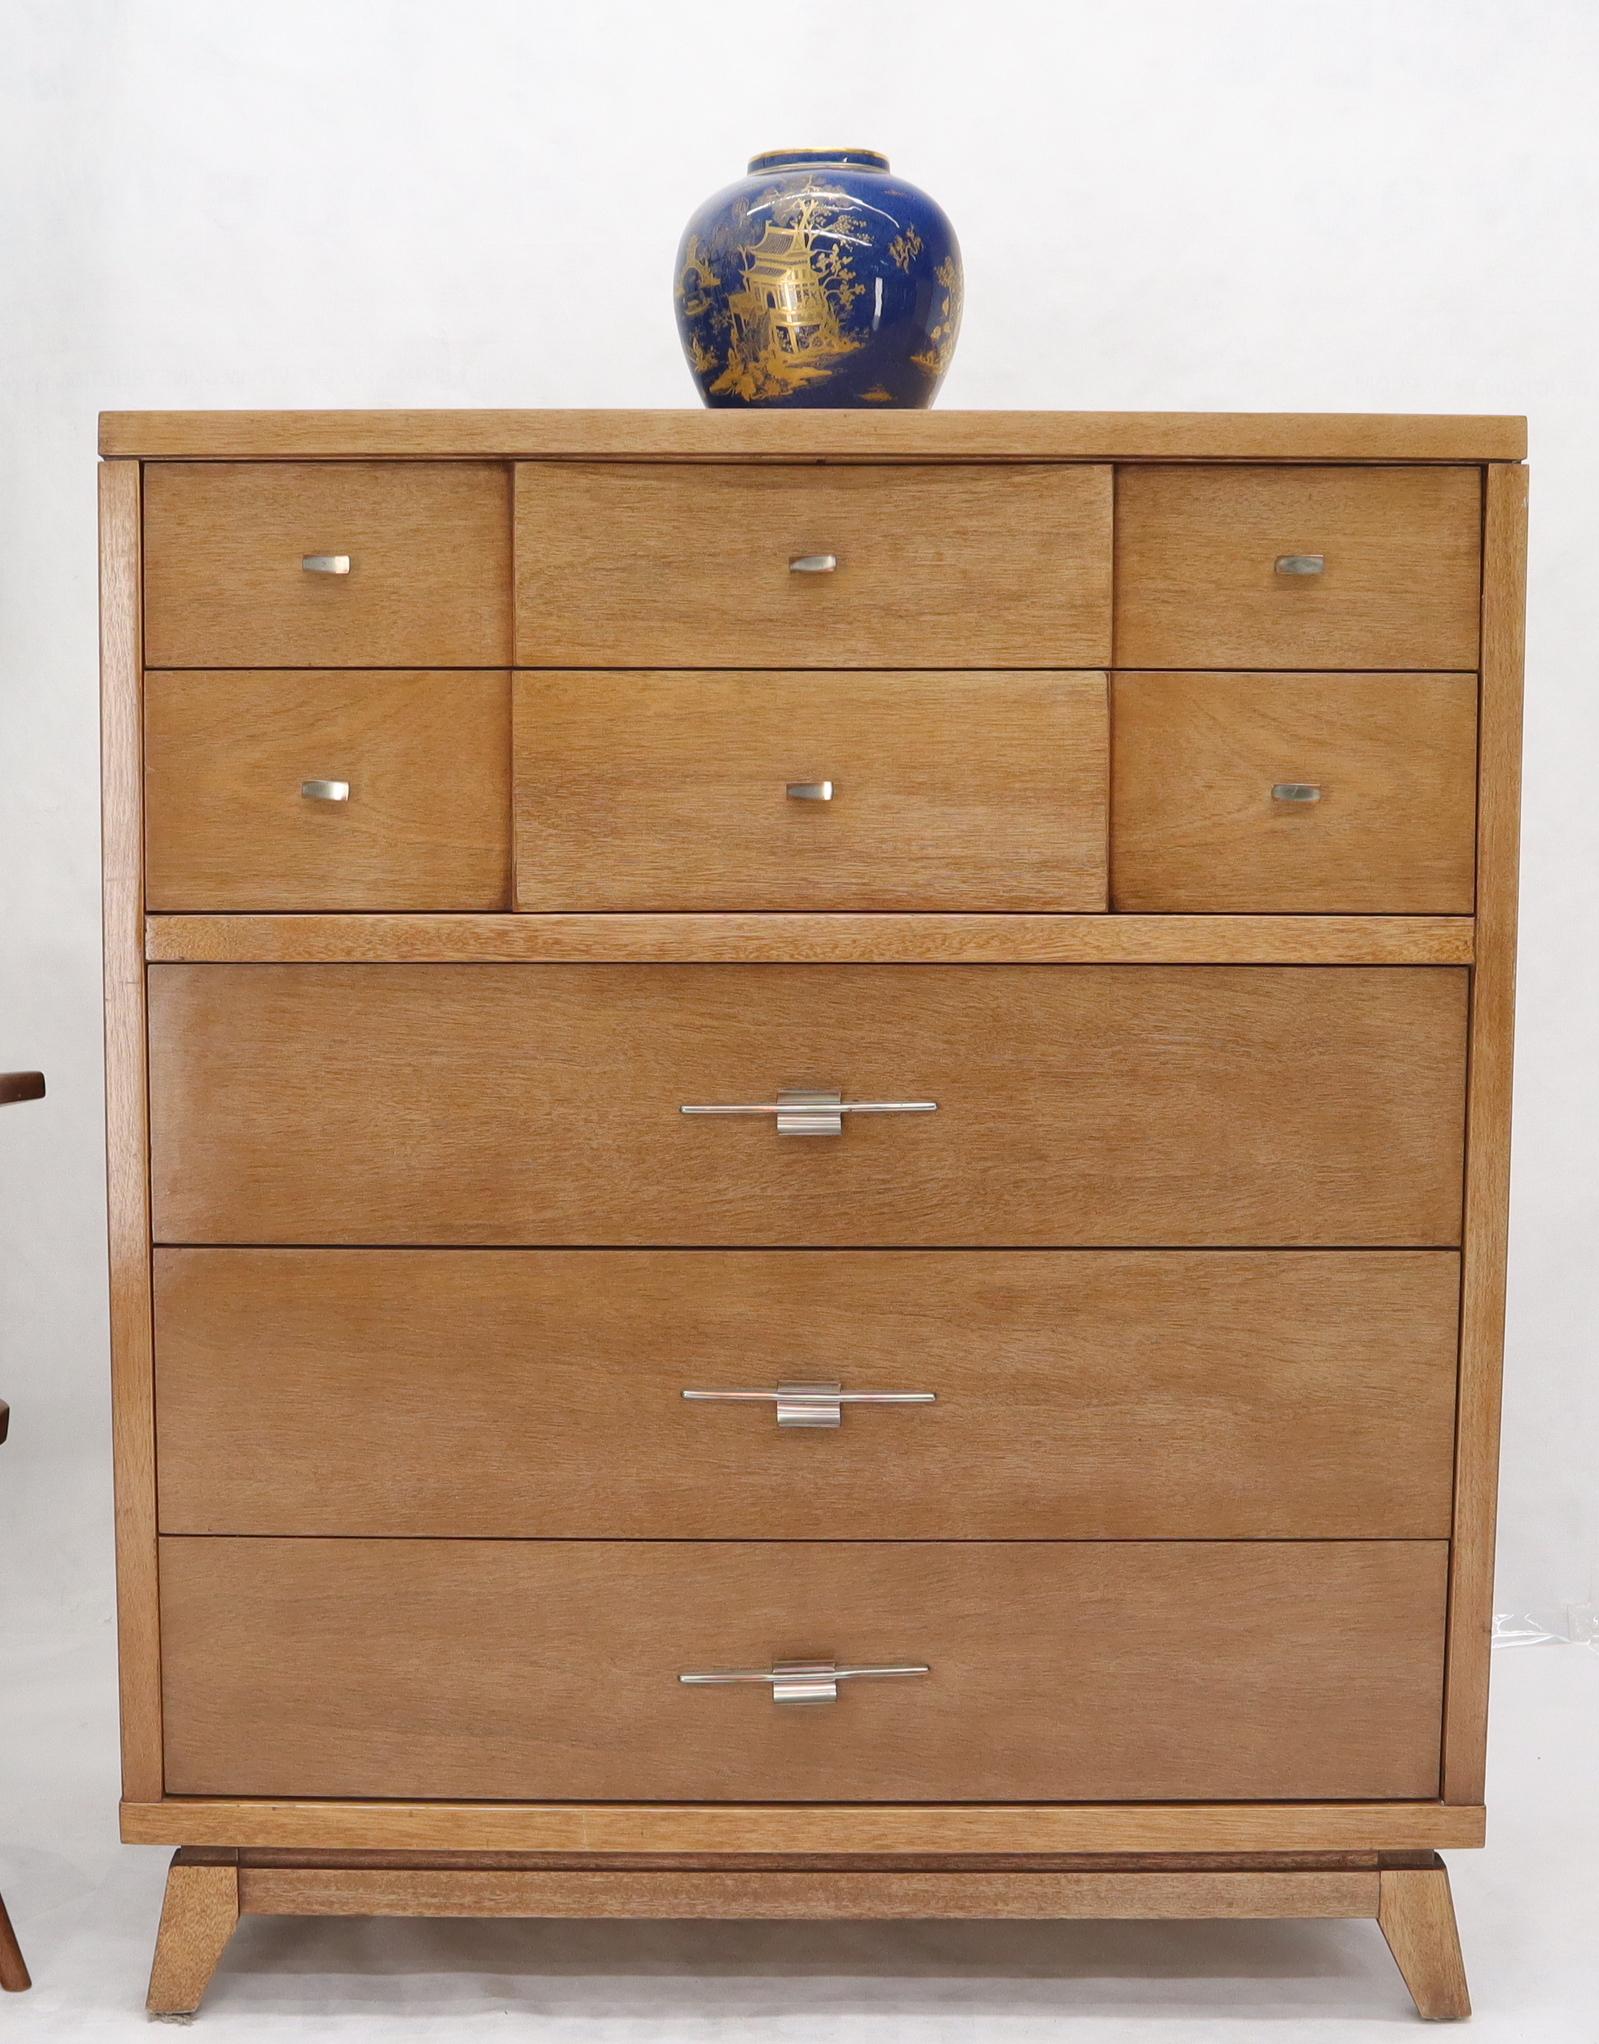 Light Tone Five Drawers High Chest by Hooker In Good Condition For Sale In Rockaway, NJ